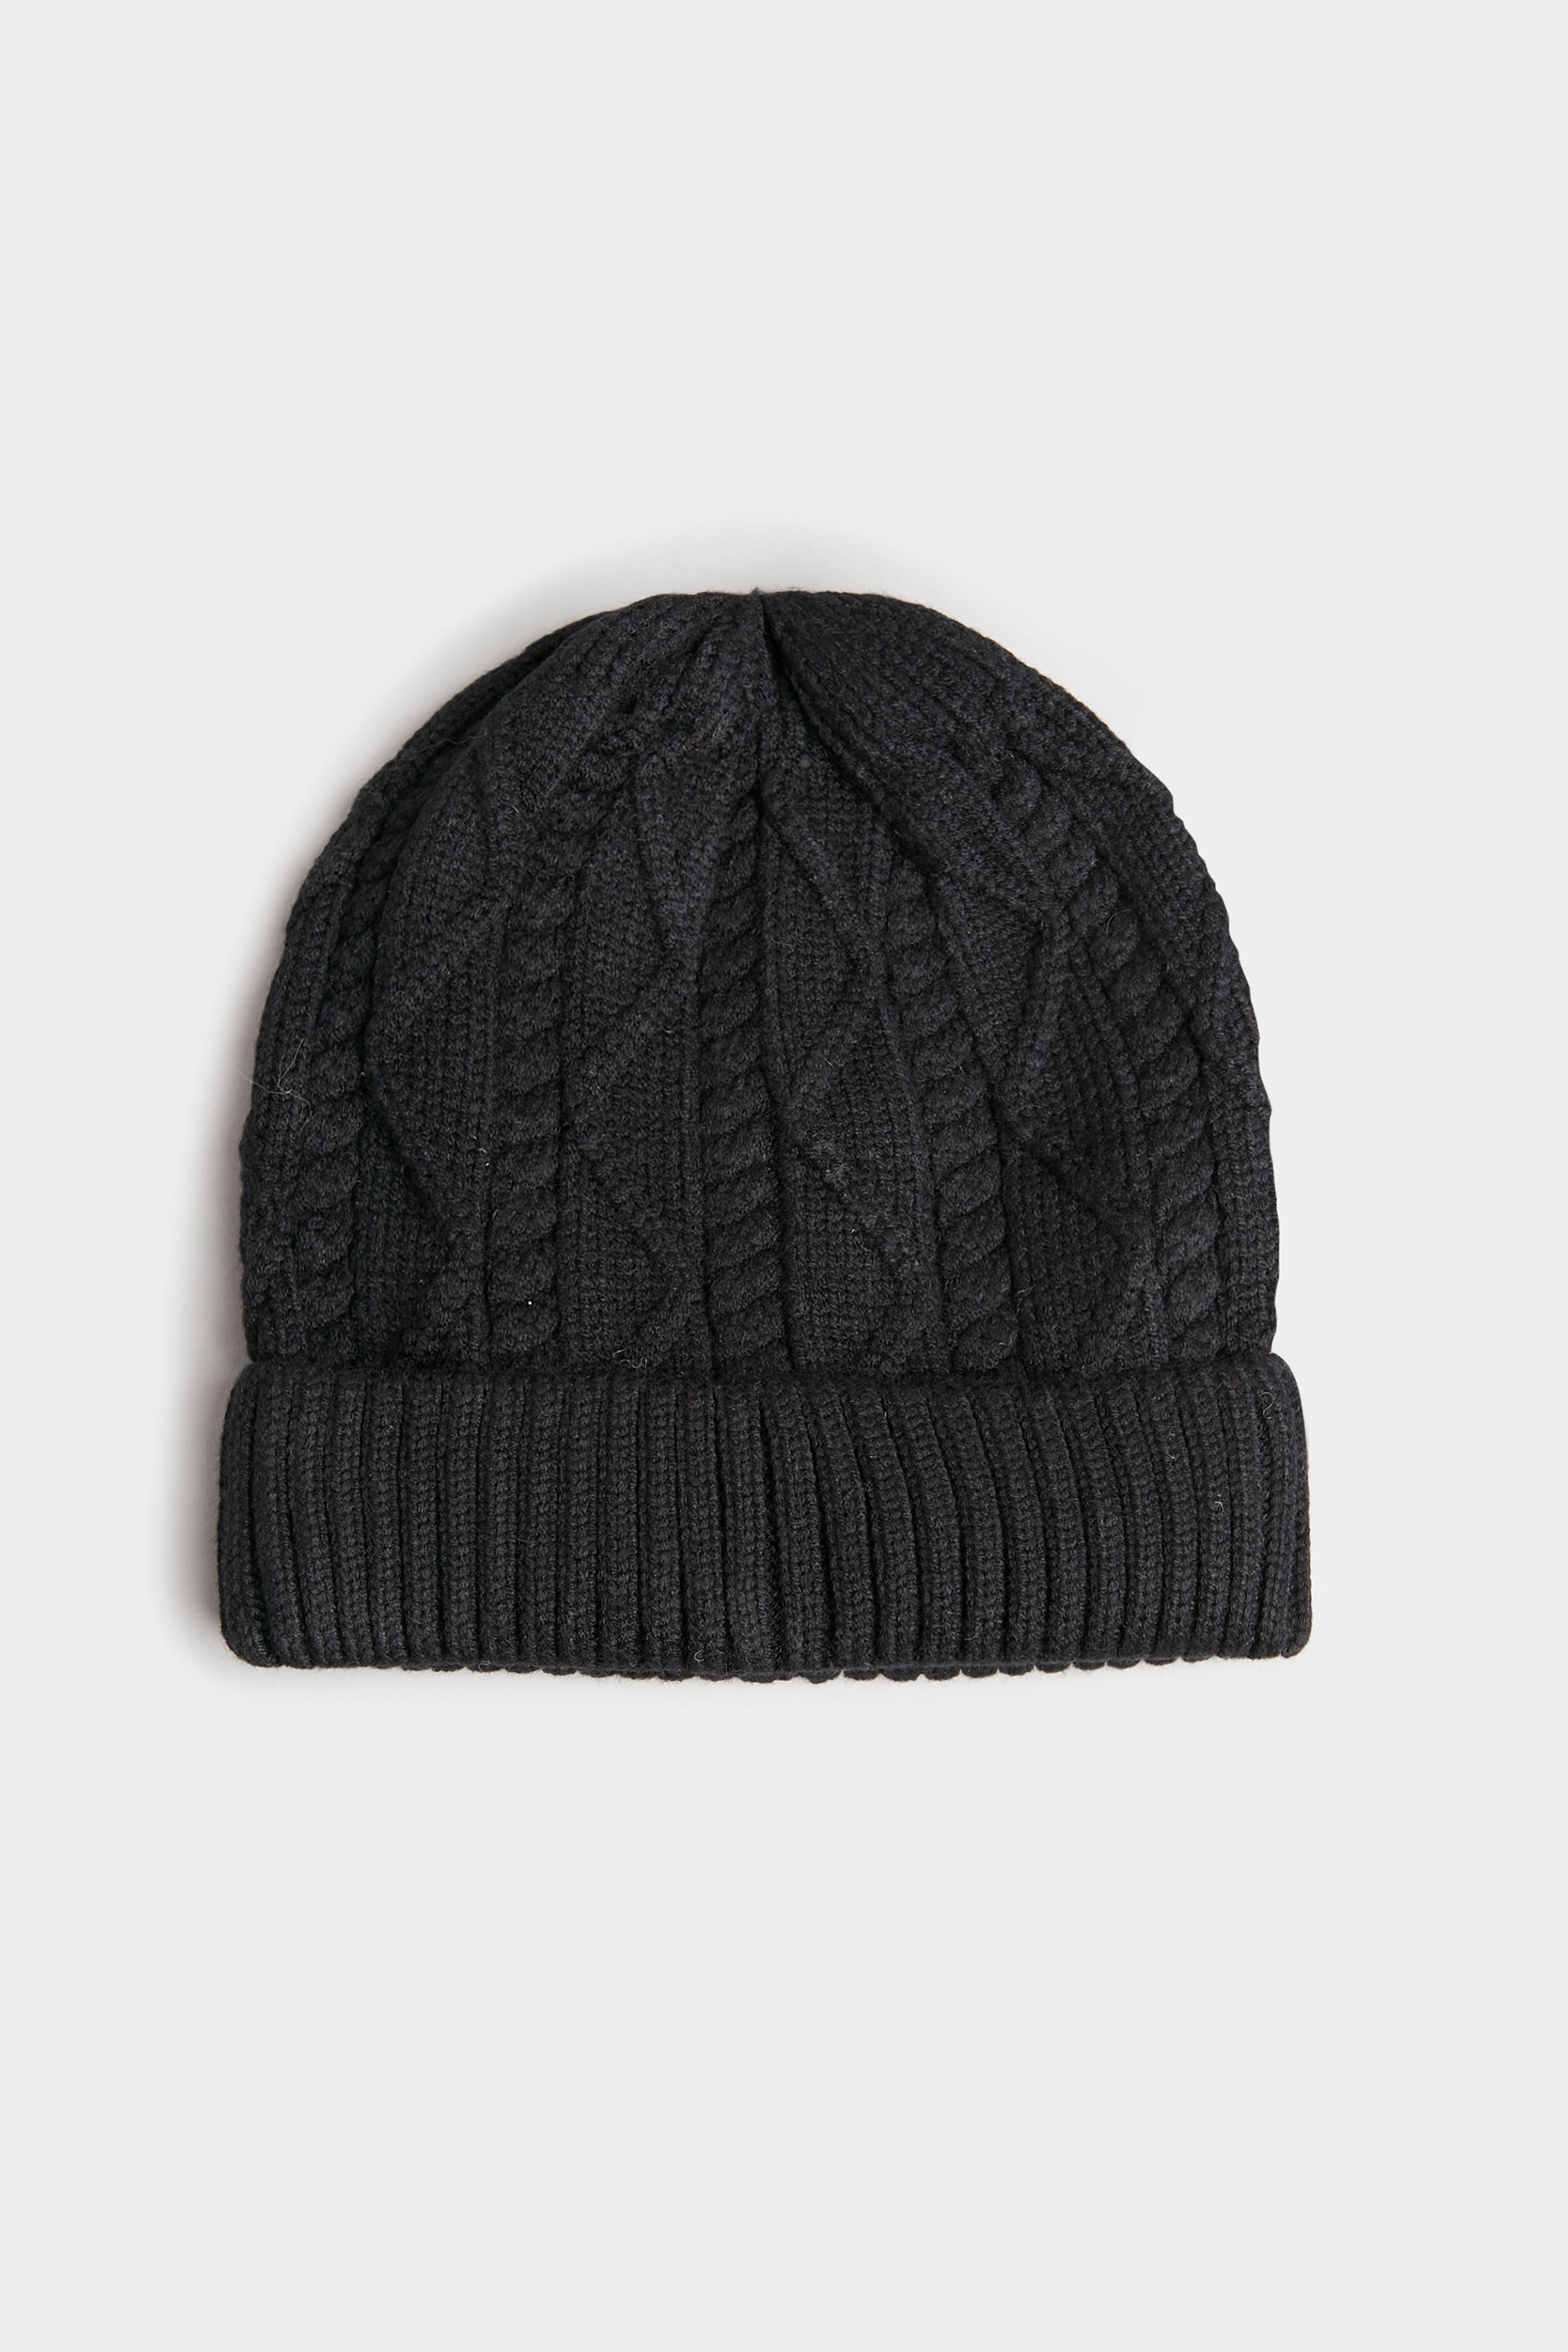 Black Cable Knitted Beanie Hat 1